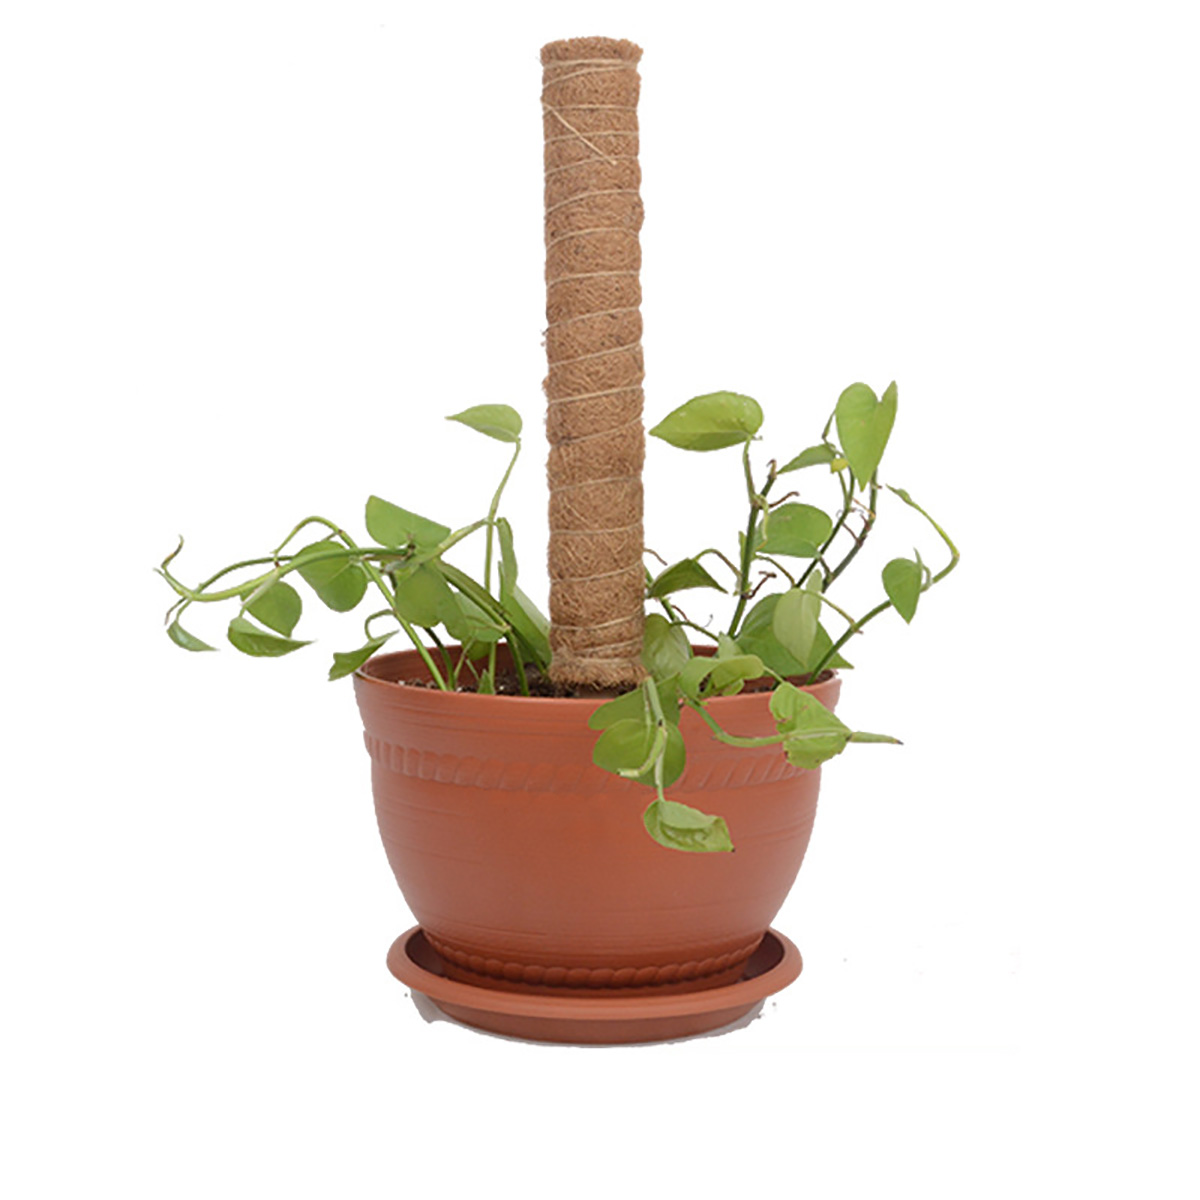 4-Pack-Coir-Totem-Pole-Plant-Coir-Moss-Stick-Totem-Pole-for-Climmbing-Plant-Support-Extension-Climbi-1824346-6